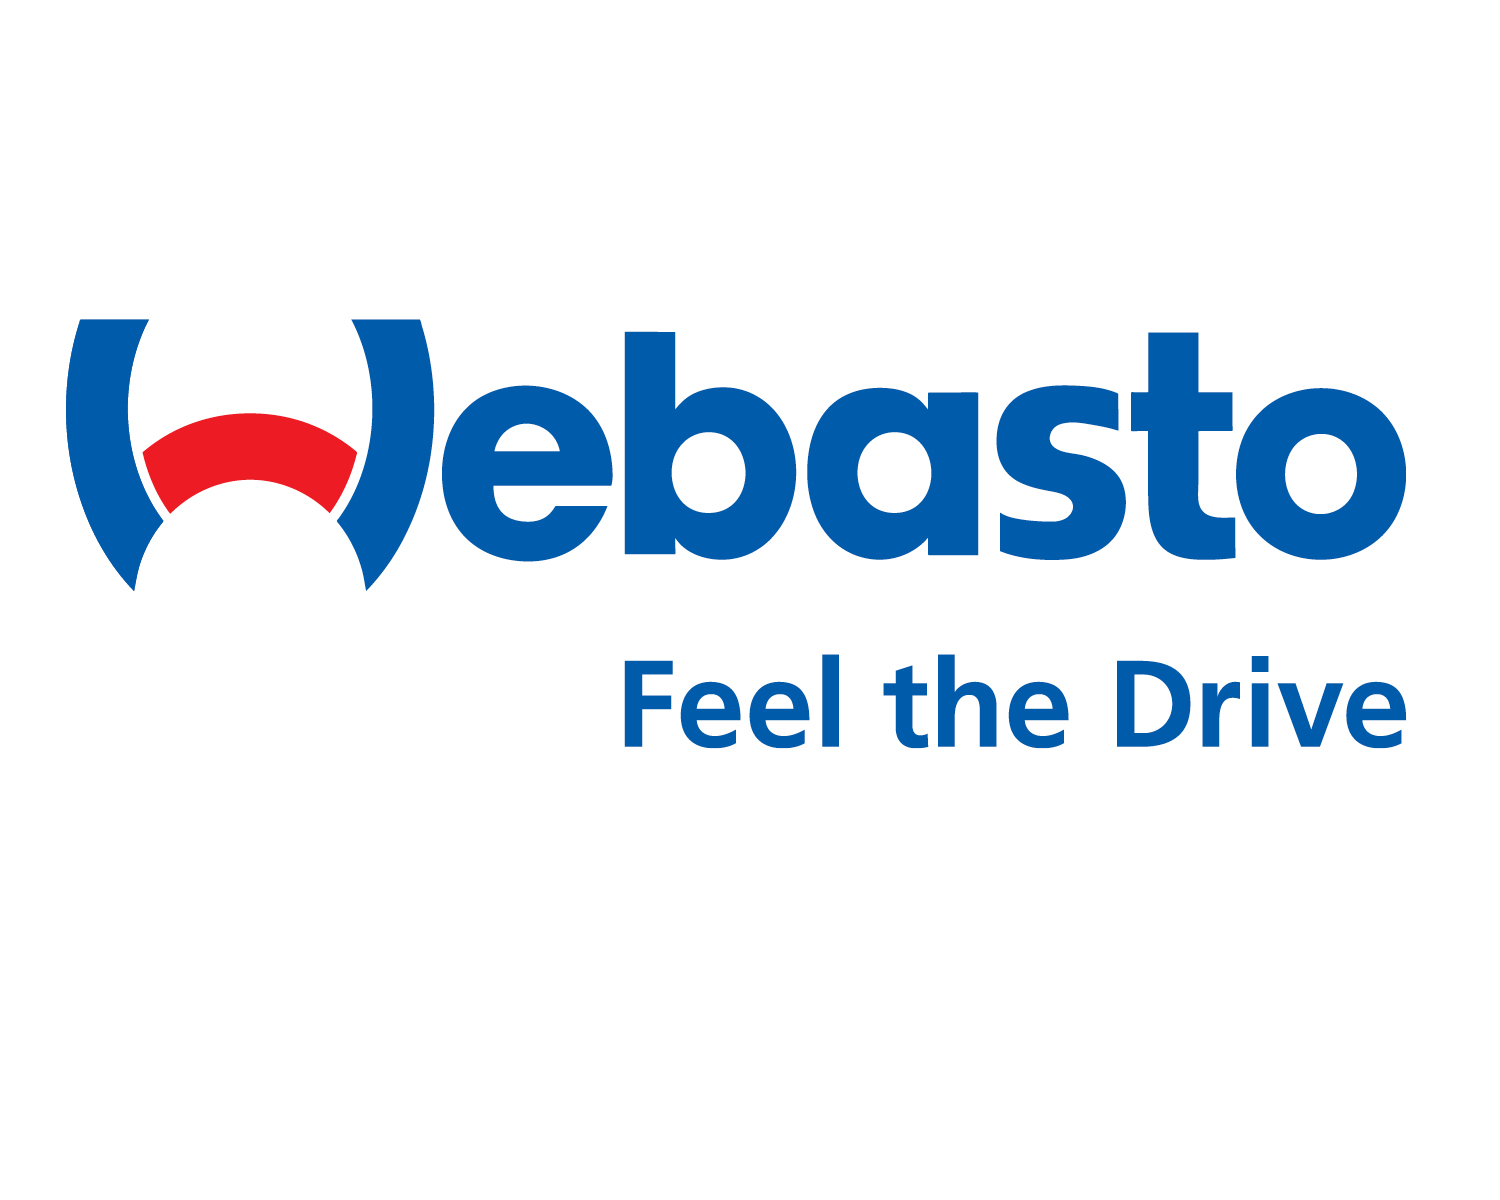 Webasto Thermo & Comfort North America is a world leader in vehicle heating equipment.